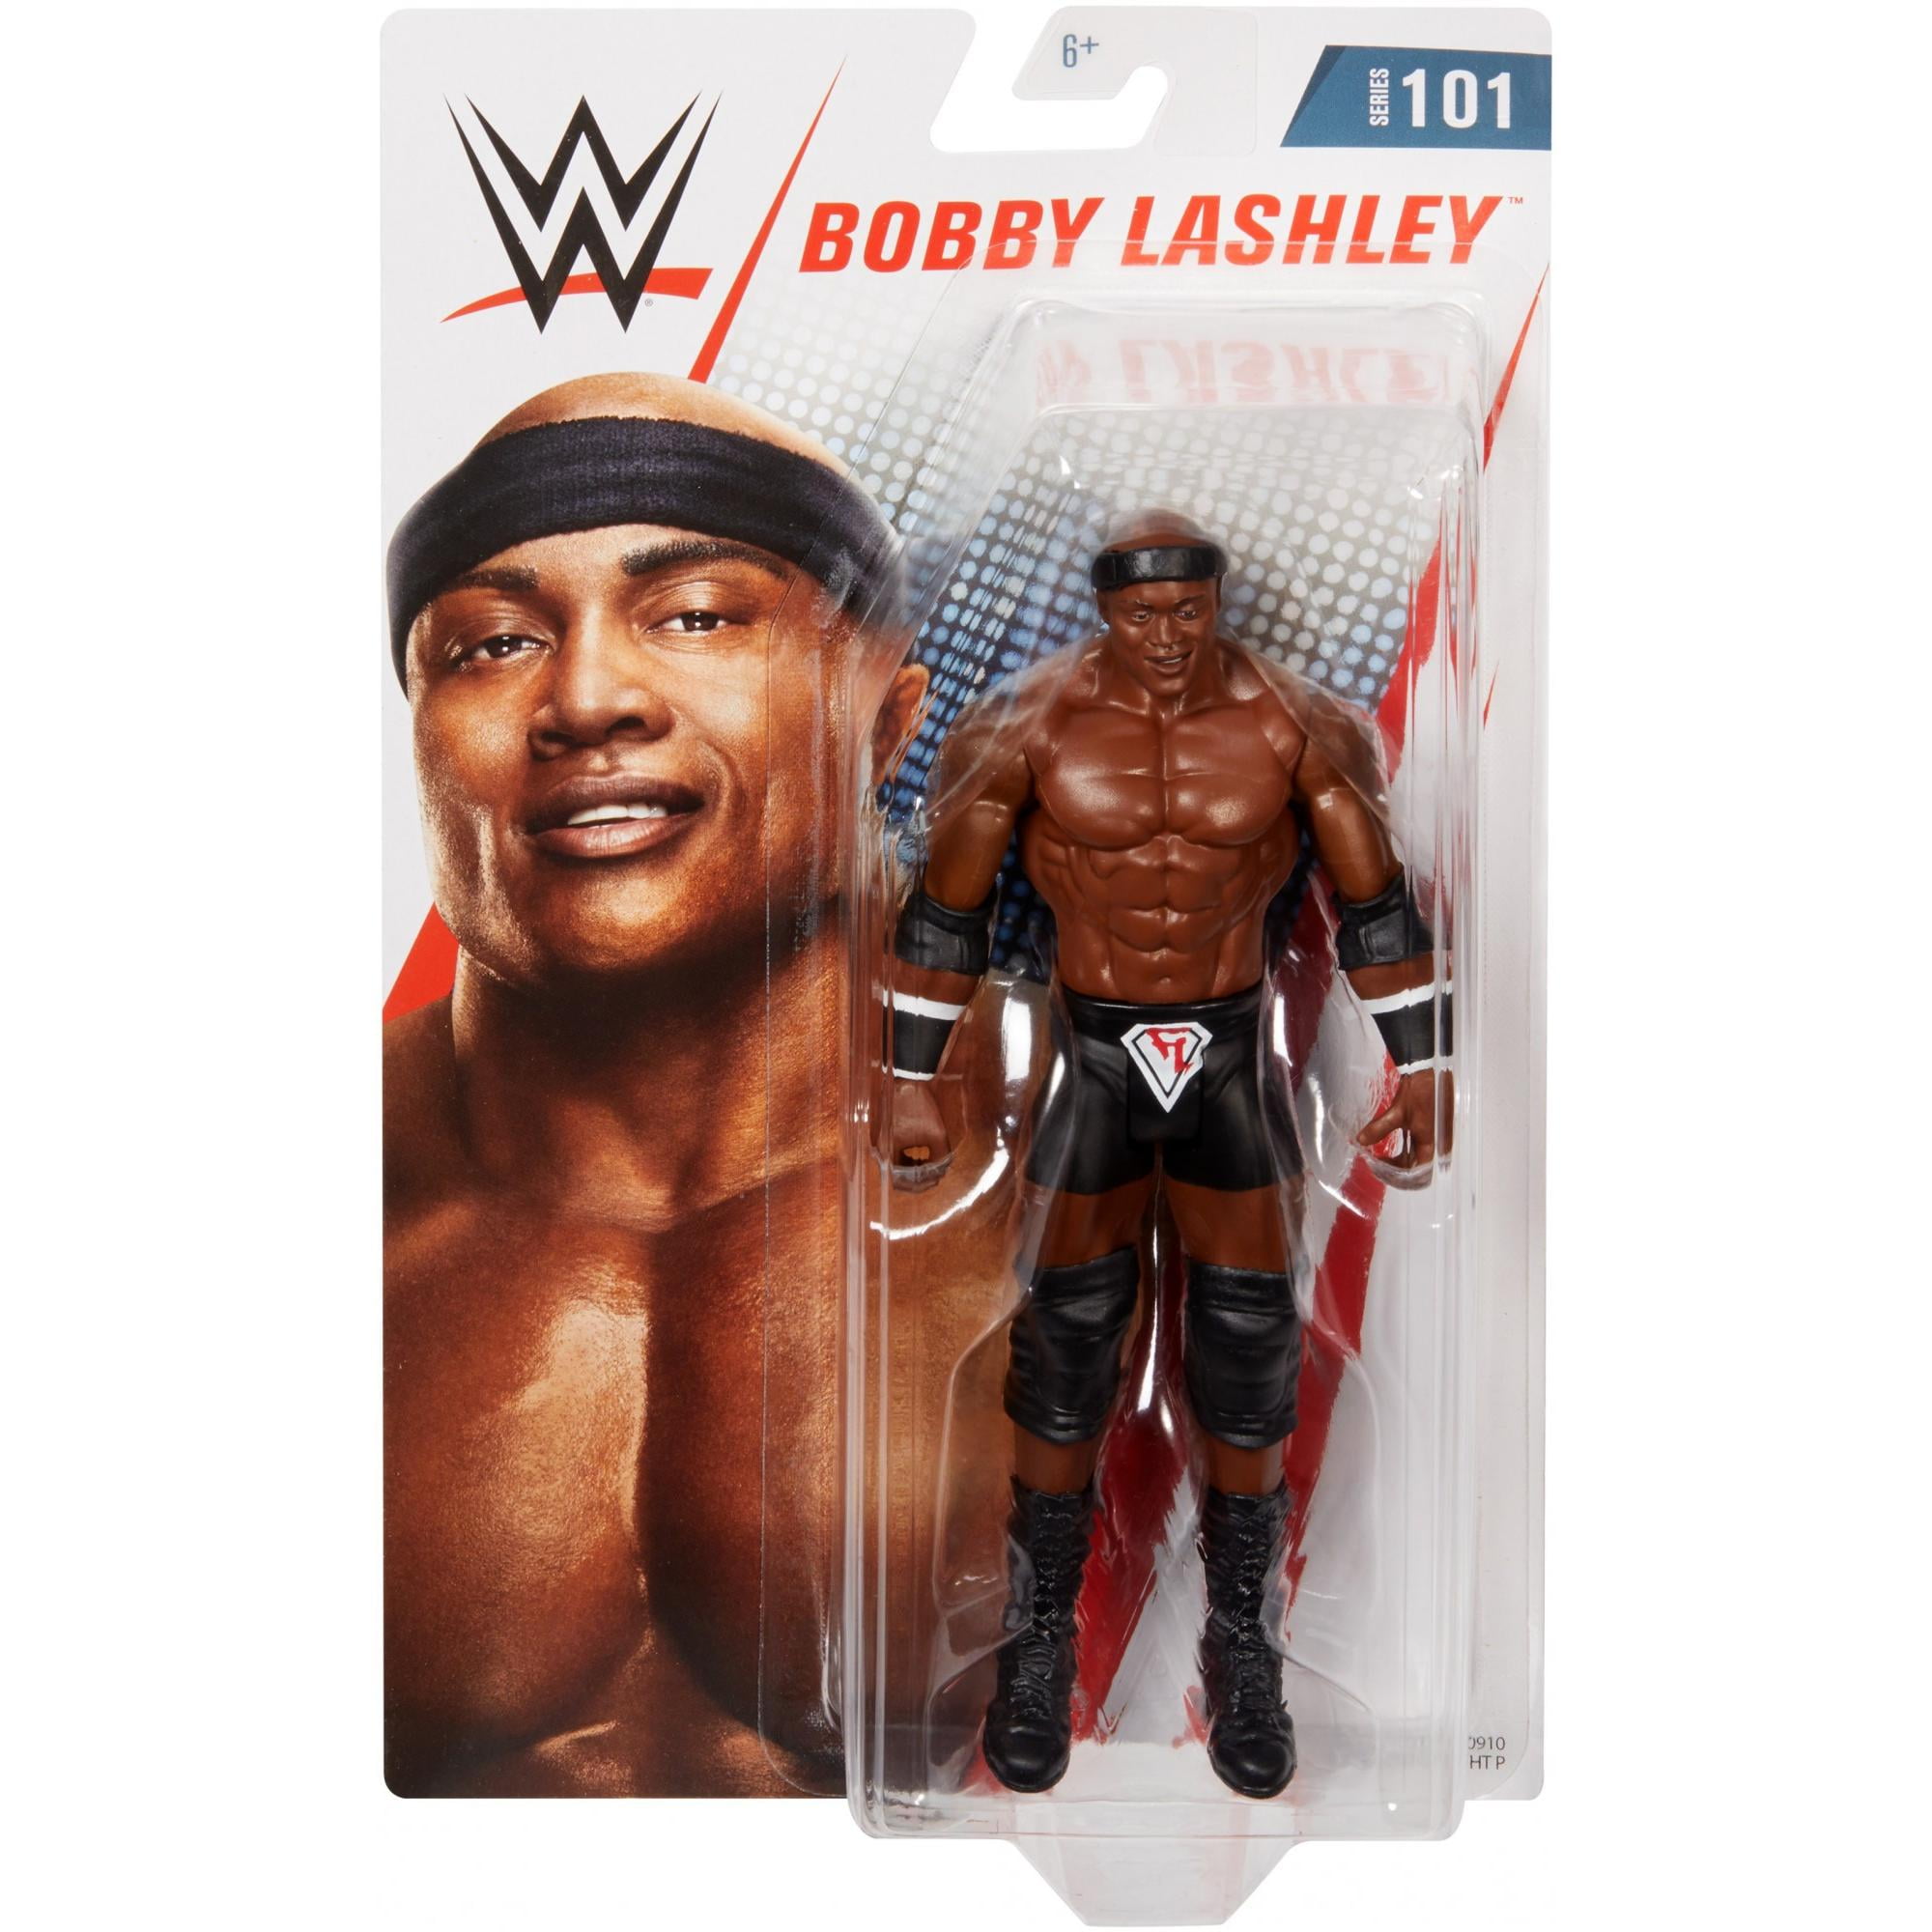 Latest wwe bobby lashley toy OFF-63% Free Delivery